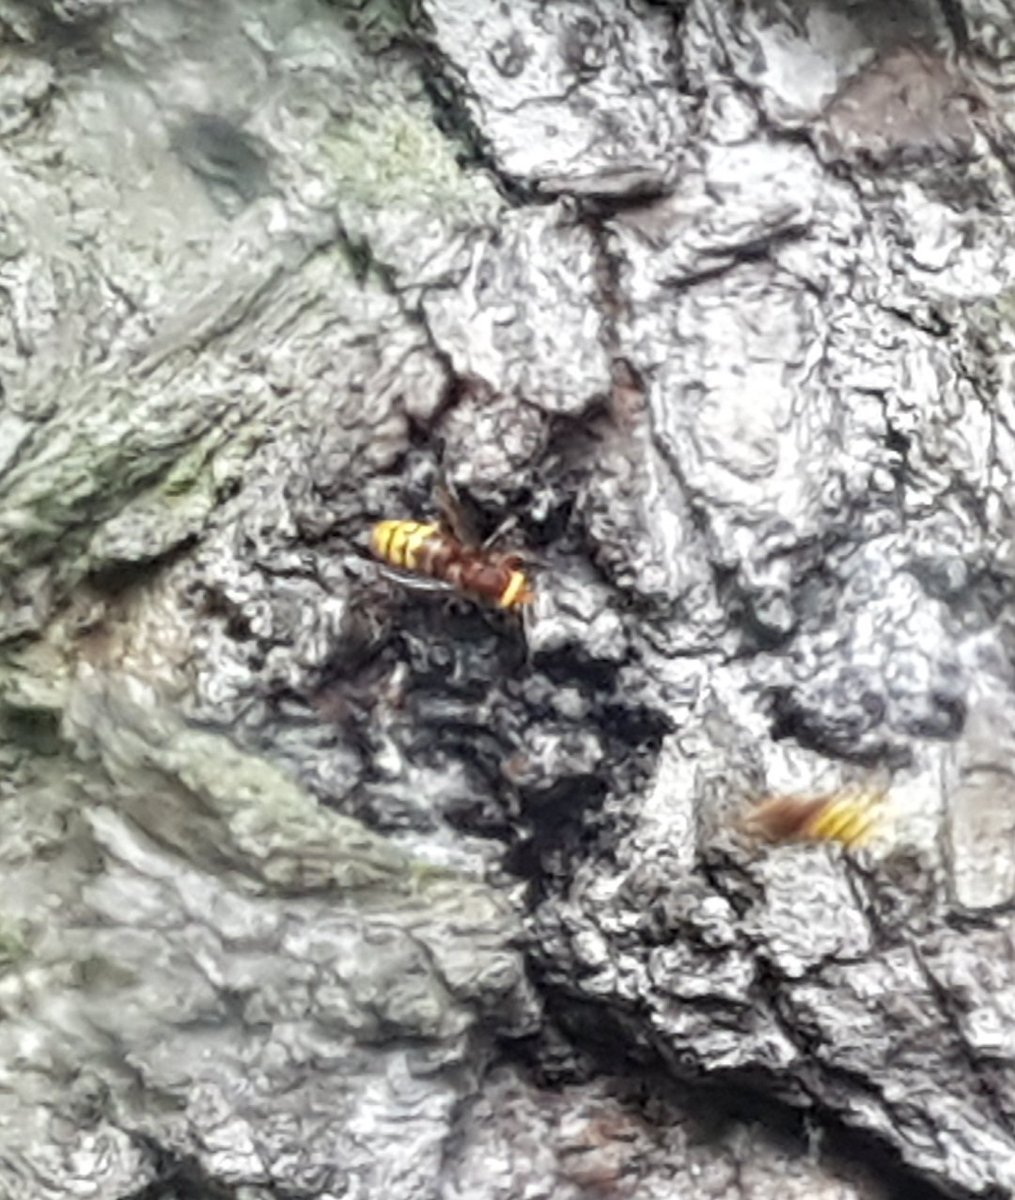 Spotted in the woods car park 😰 30-45mm long and fighting each other, very aggressive things. I've reported them, just in case they're the bee killers.